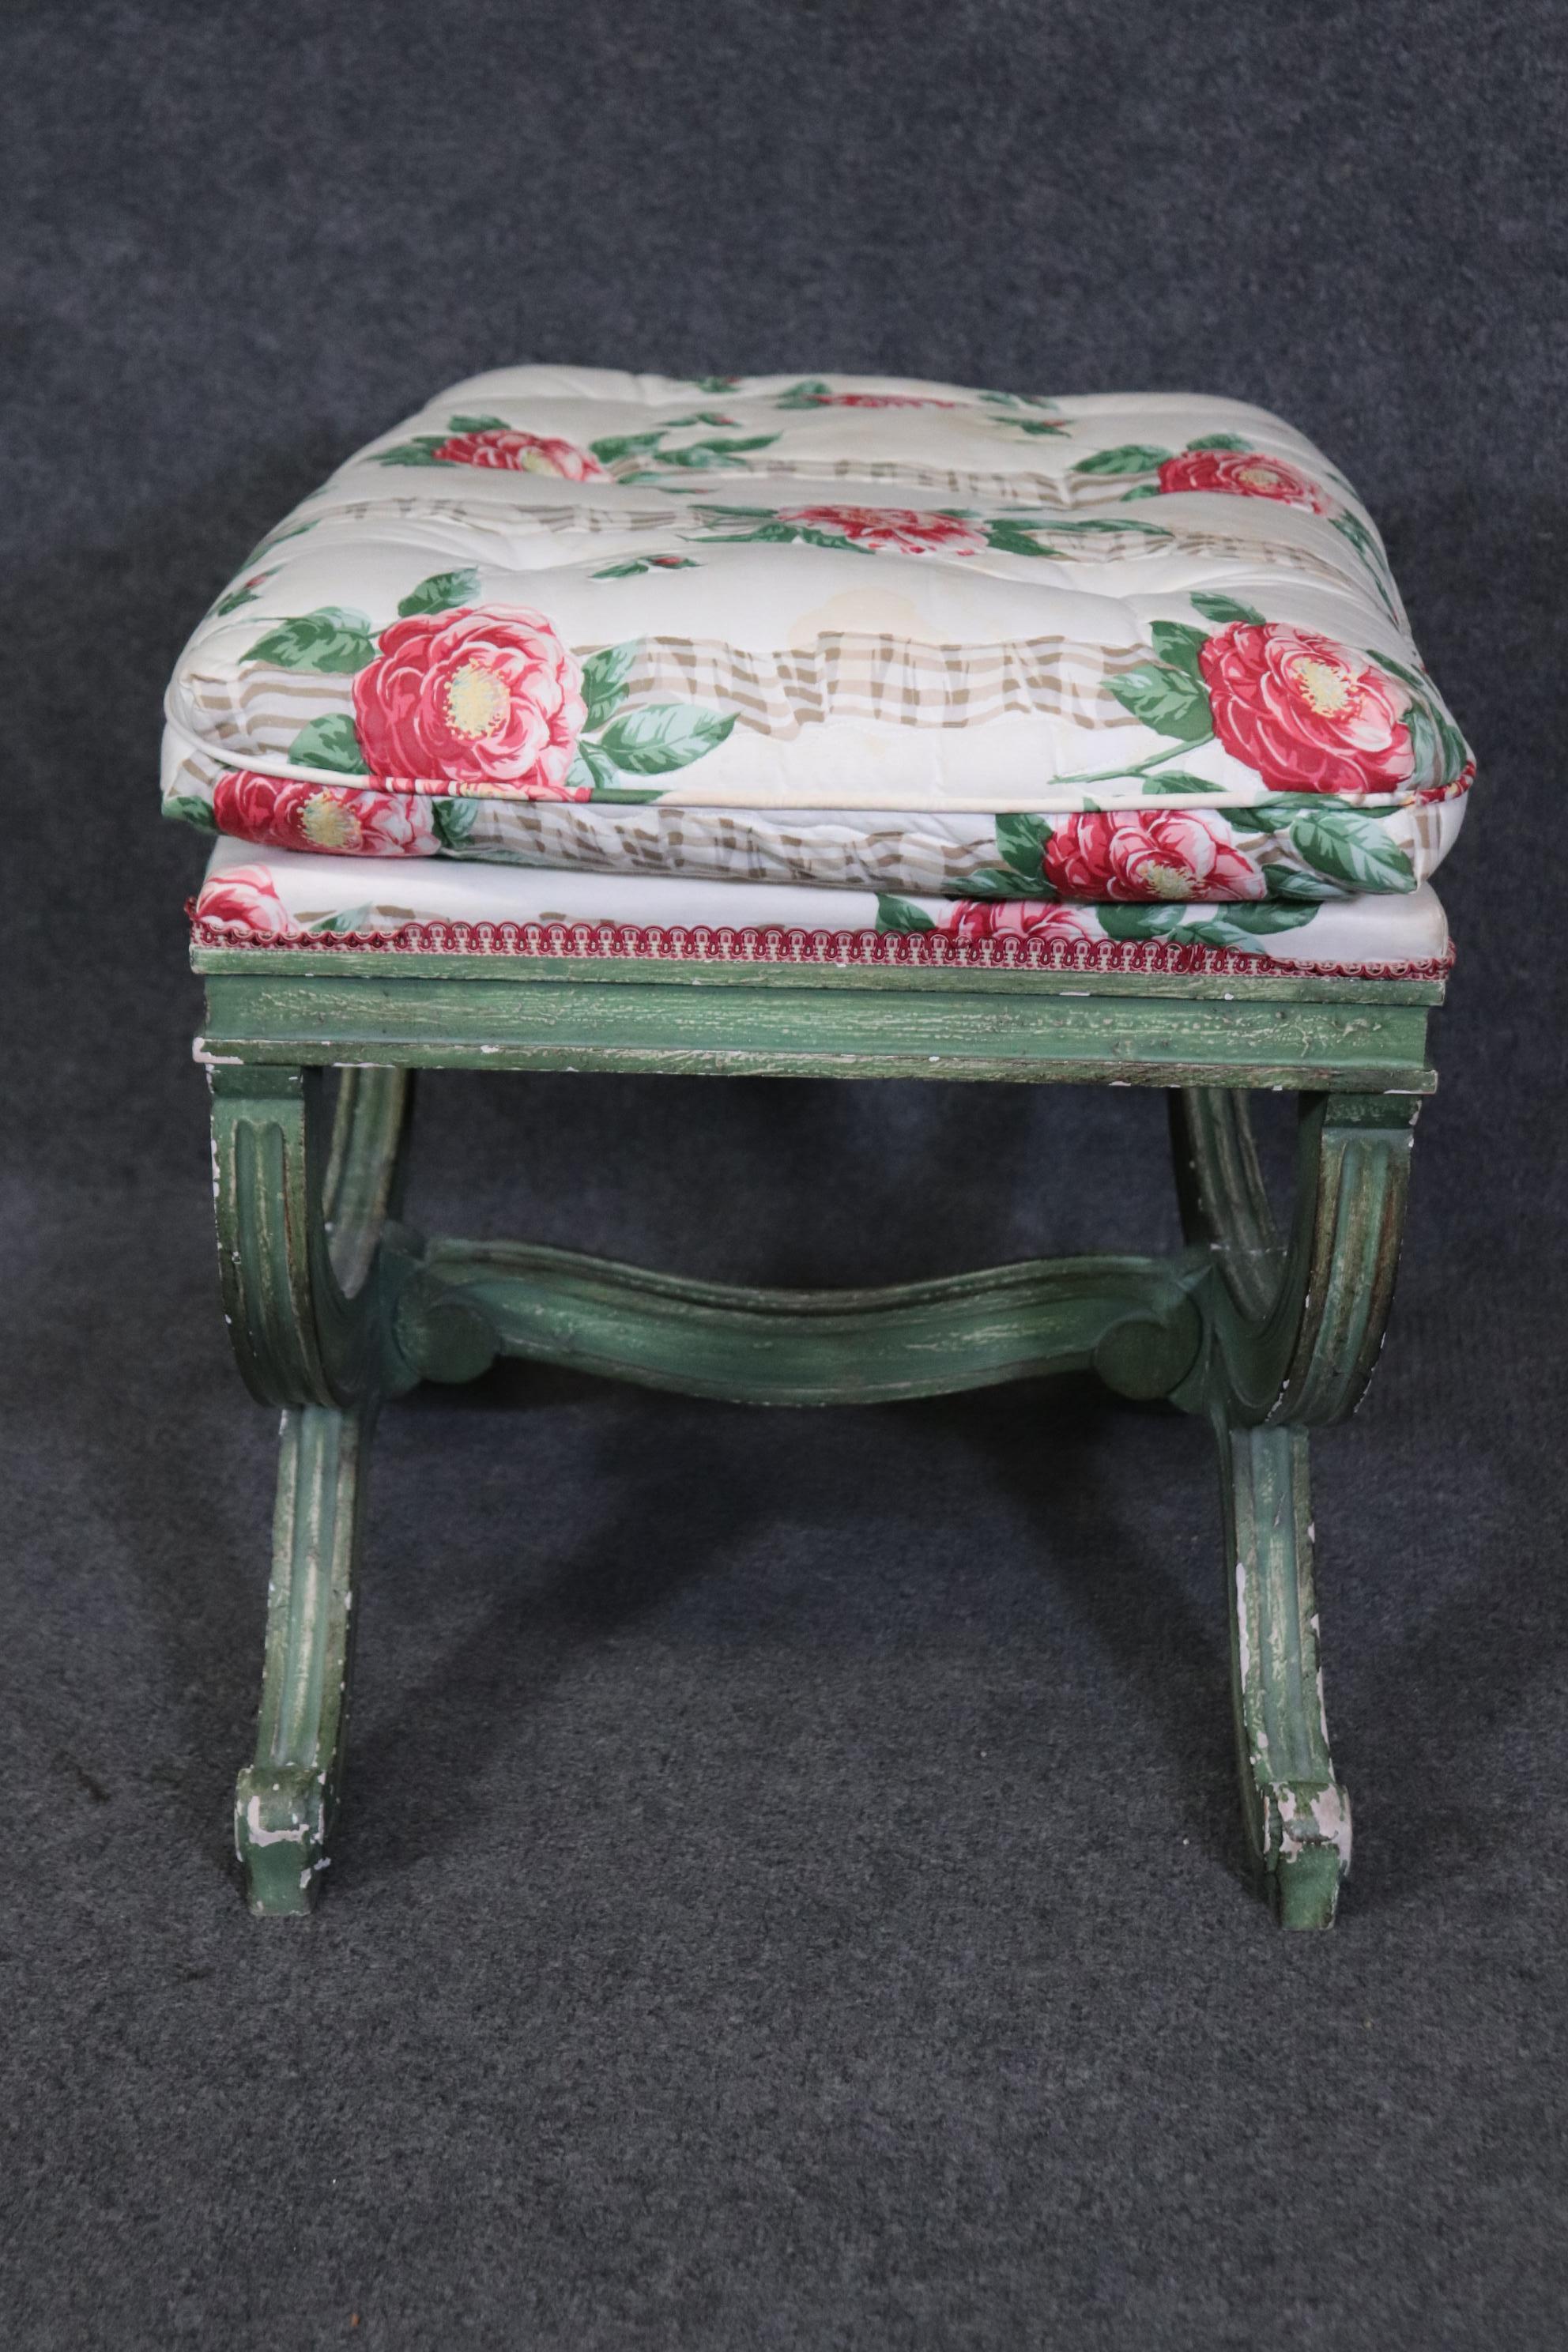 Walnut Gorgeous Green Painted decorated Upholstered Cerule Style Regency Bench Stool For Sale